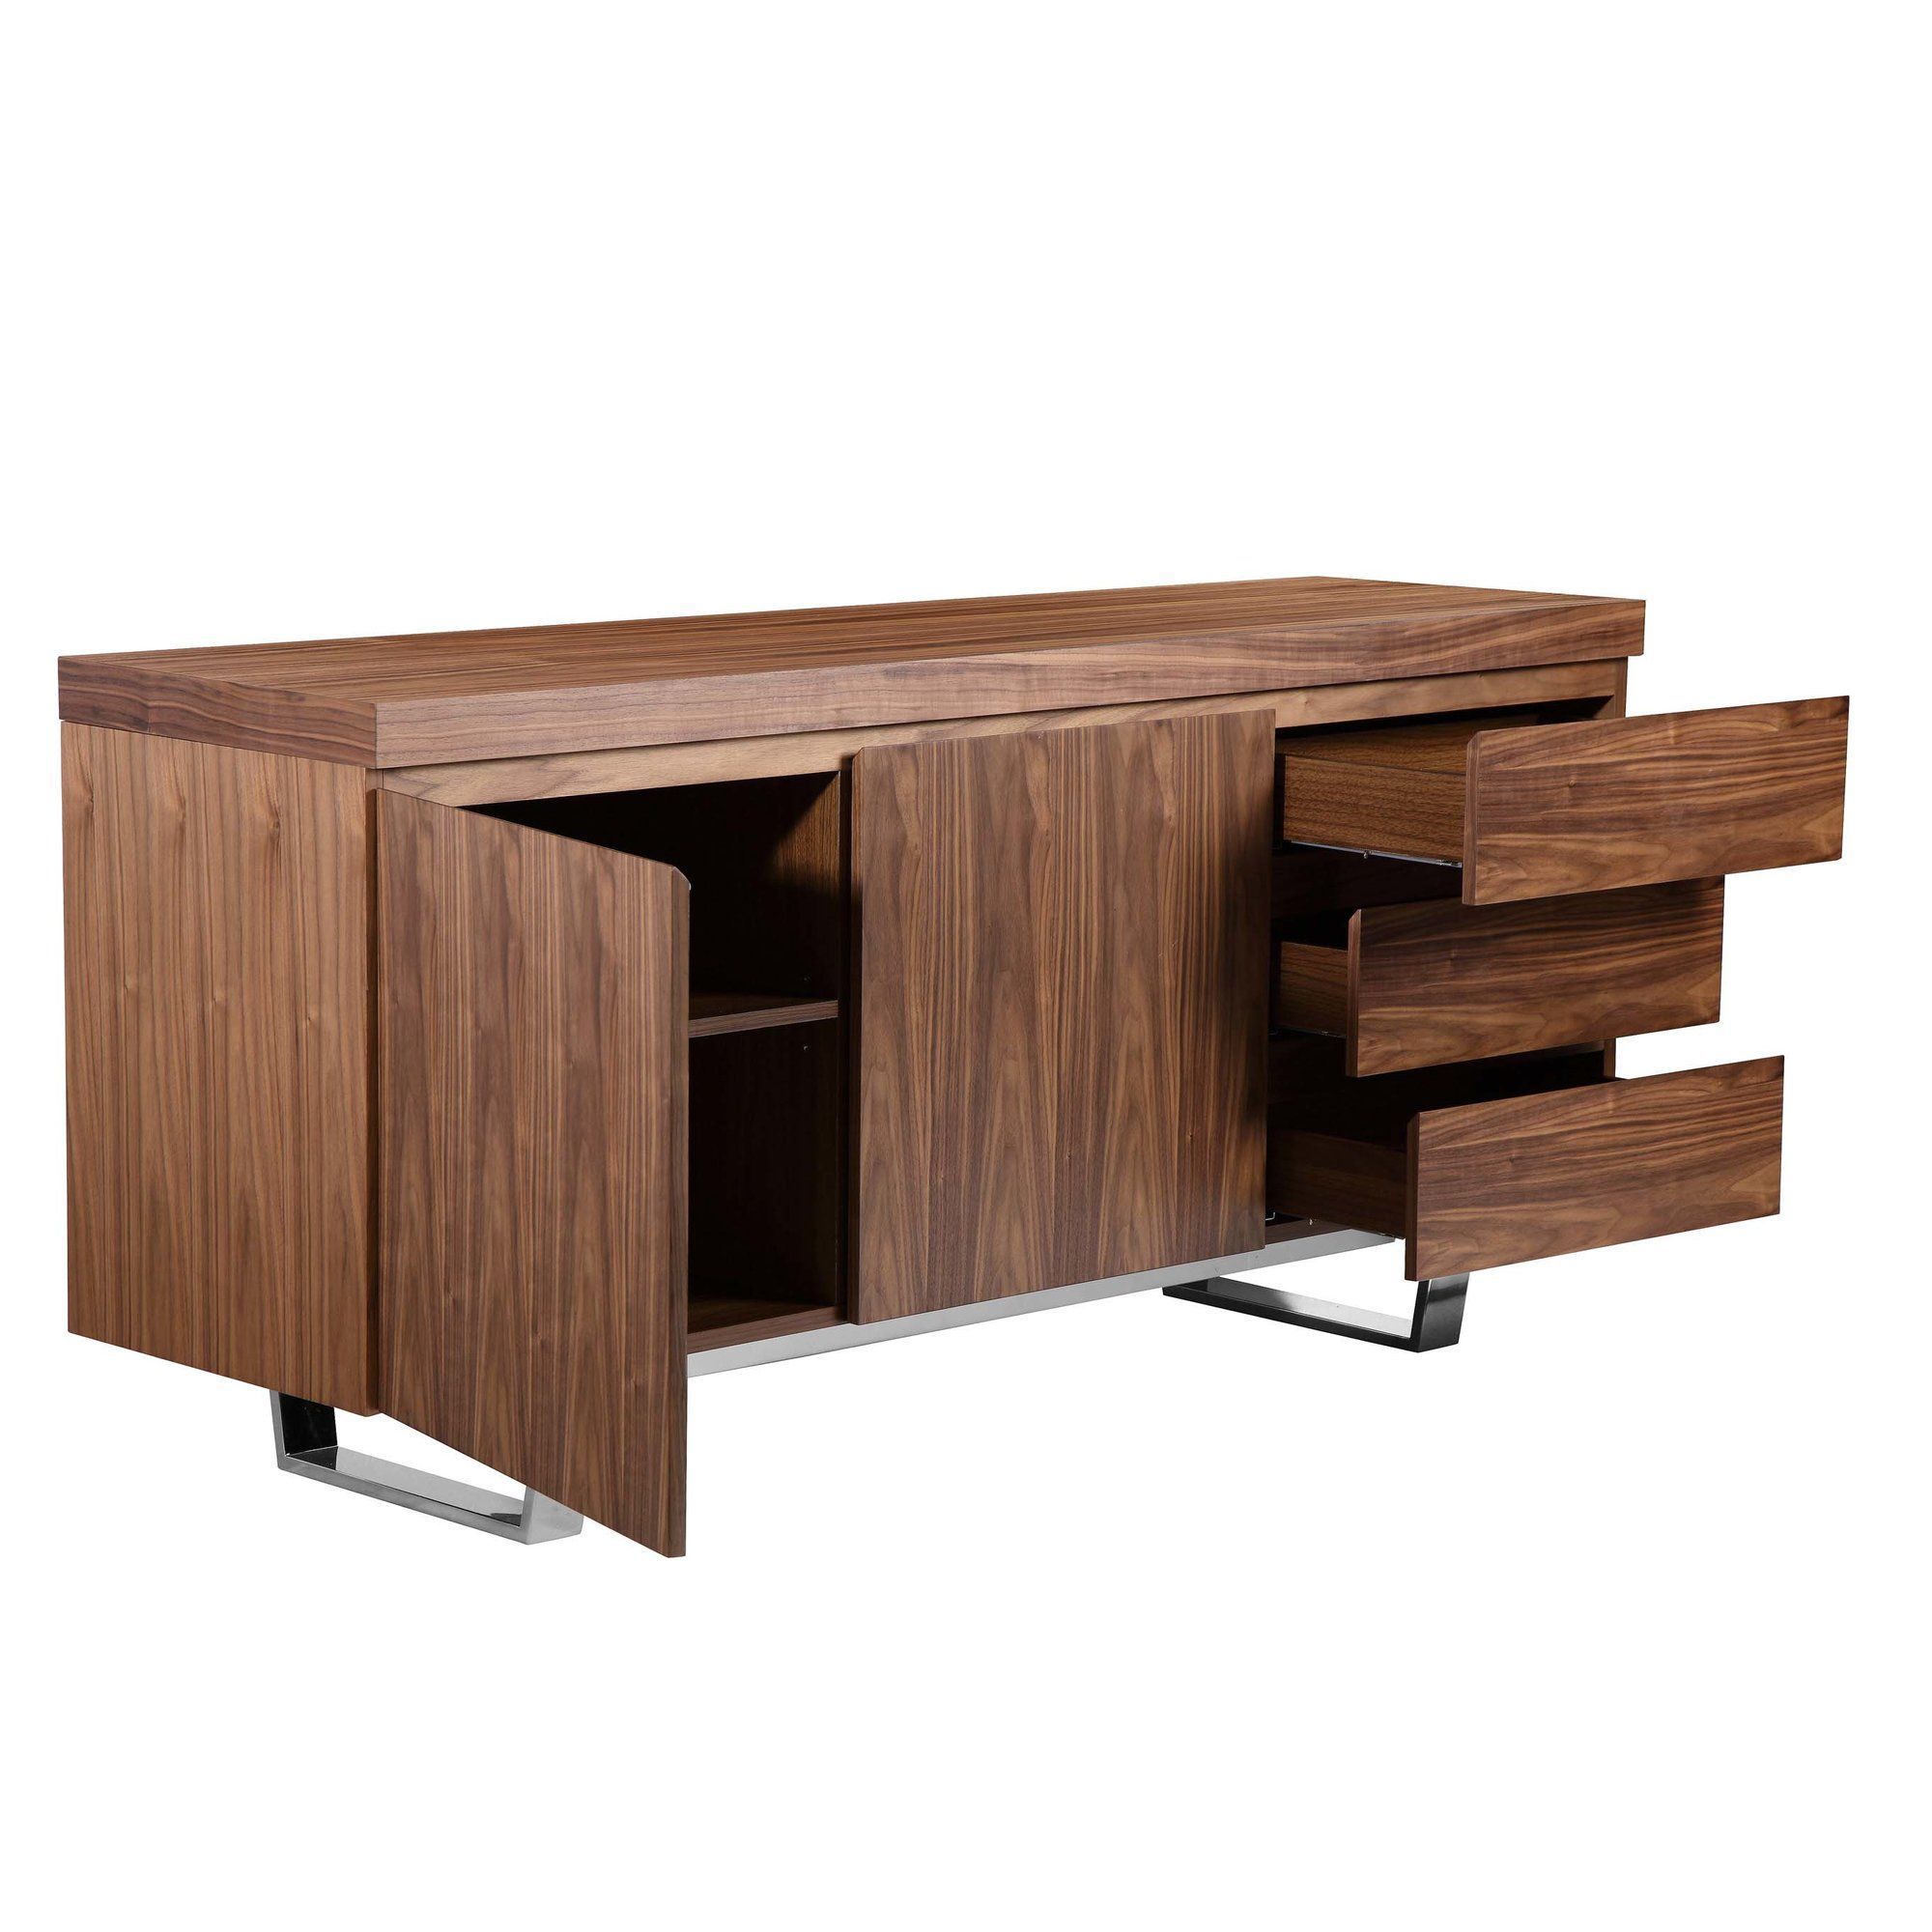 Tucci Sideboard | Sideboards | Sideboard, Sideboard Buffet With Regard To Recent Emiliano Sideboards (View 6 of 20)